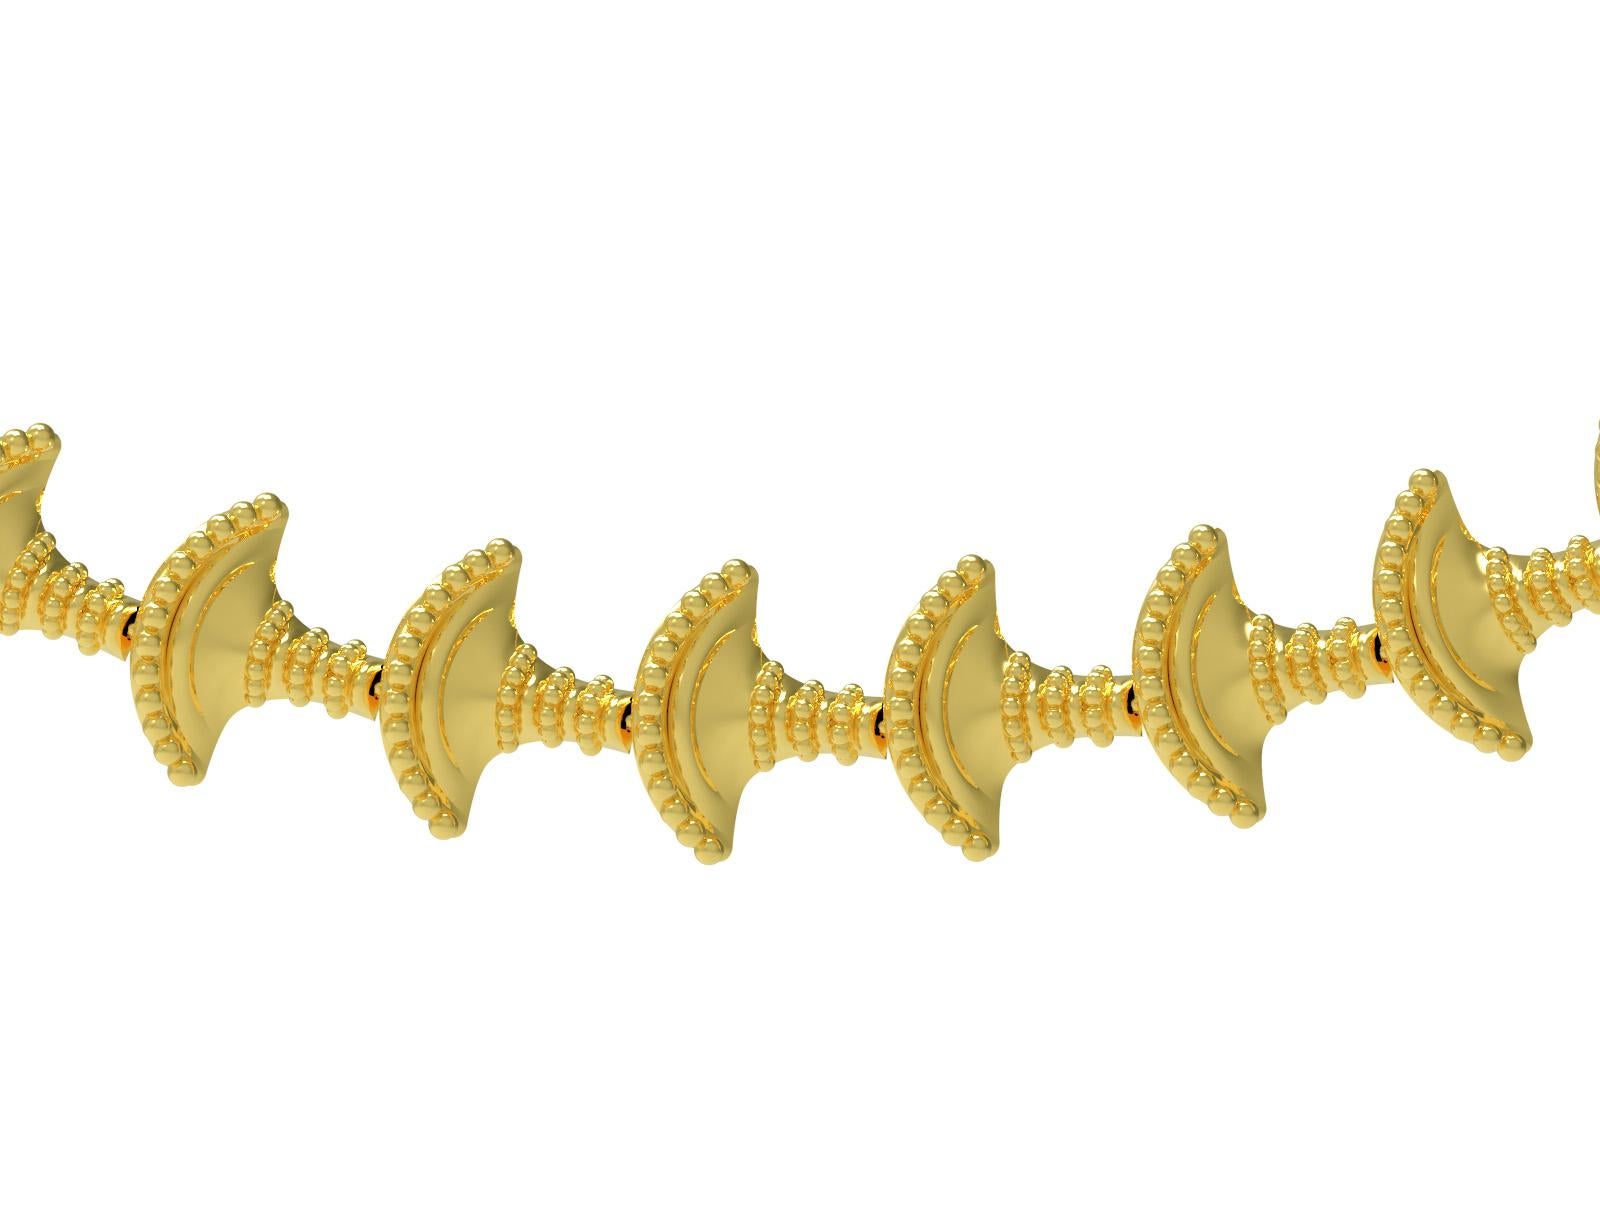 18 Karat Yellow Gold Minoan-Inspired Basket Link Bracelet by ROMAE Jewelry. This stunning bracelet is inspired by a Minoan gold example from the area of Knossos, Crete, dating to around 1450 BC. It is made up of small links that are basket-shaped,